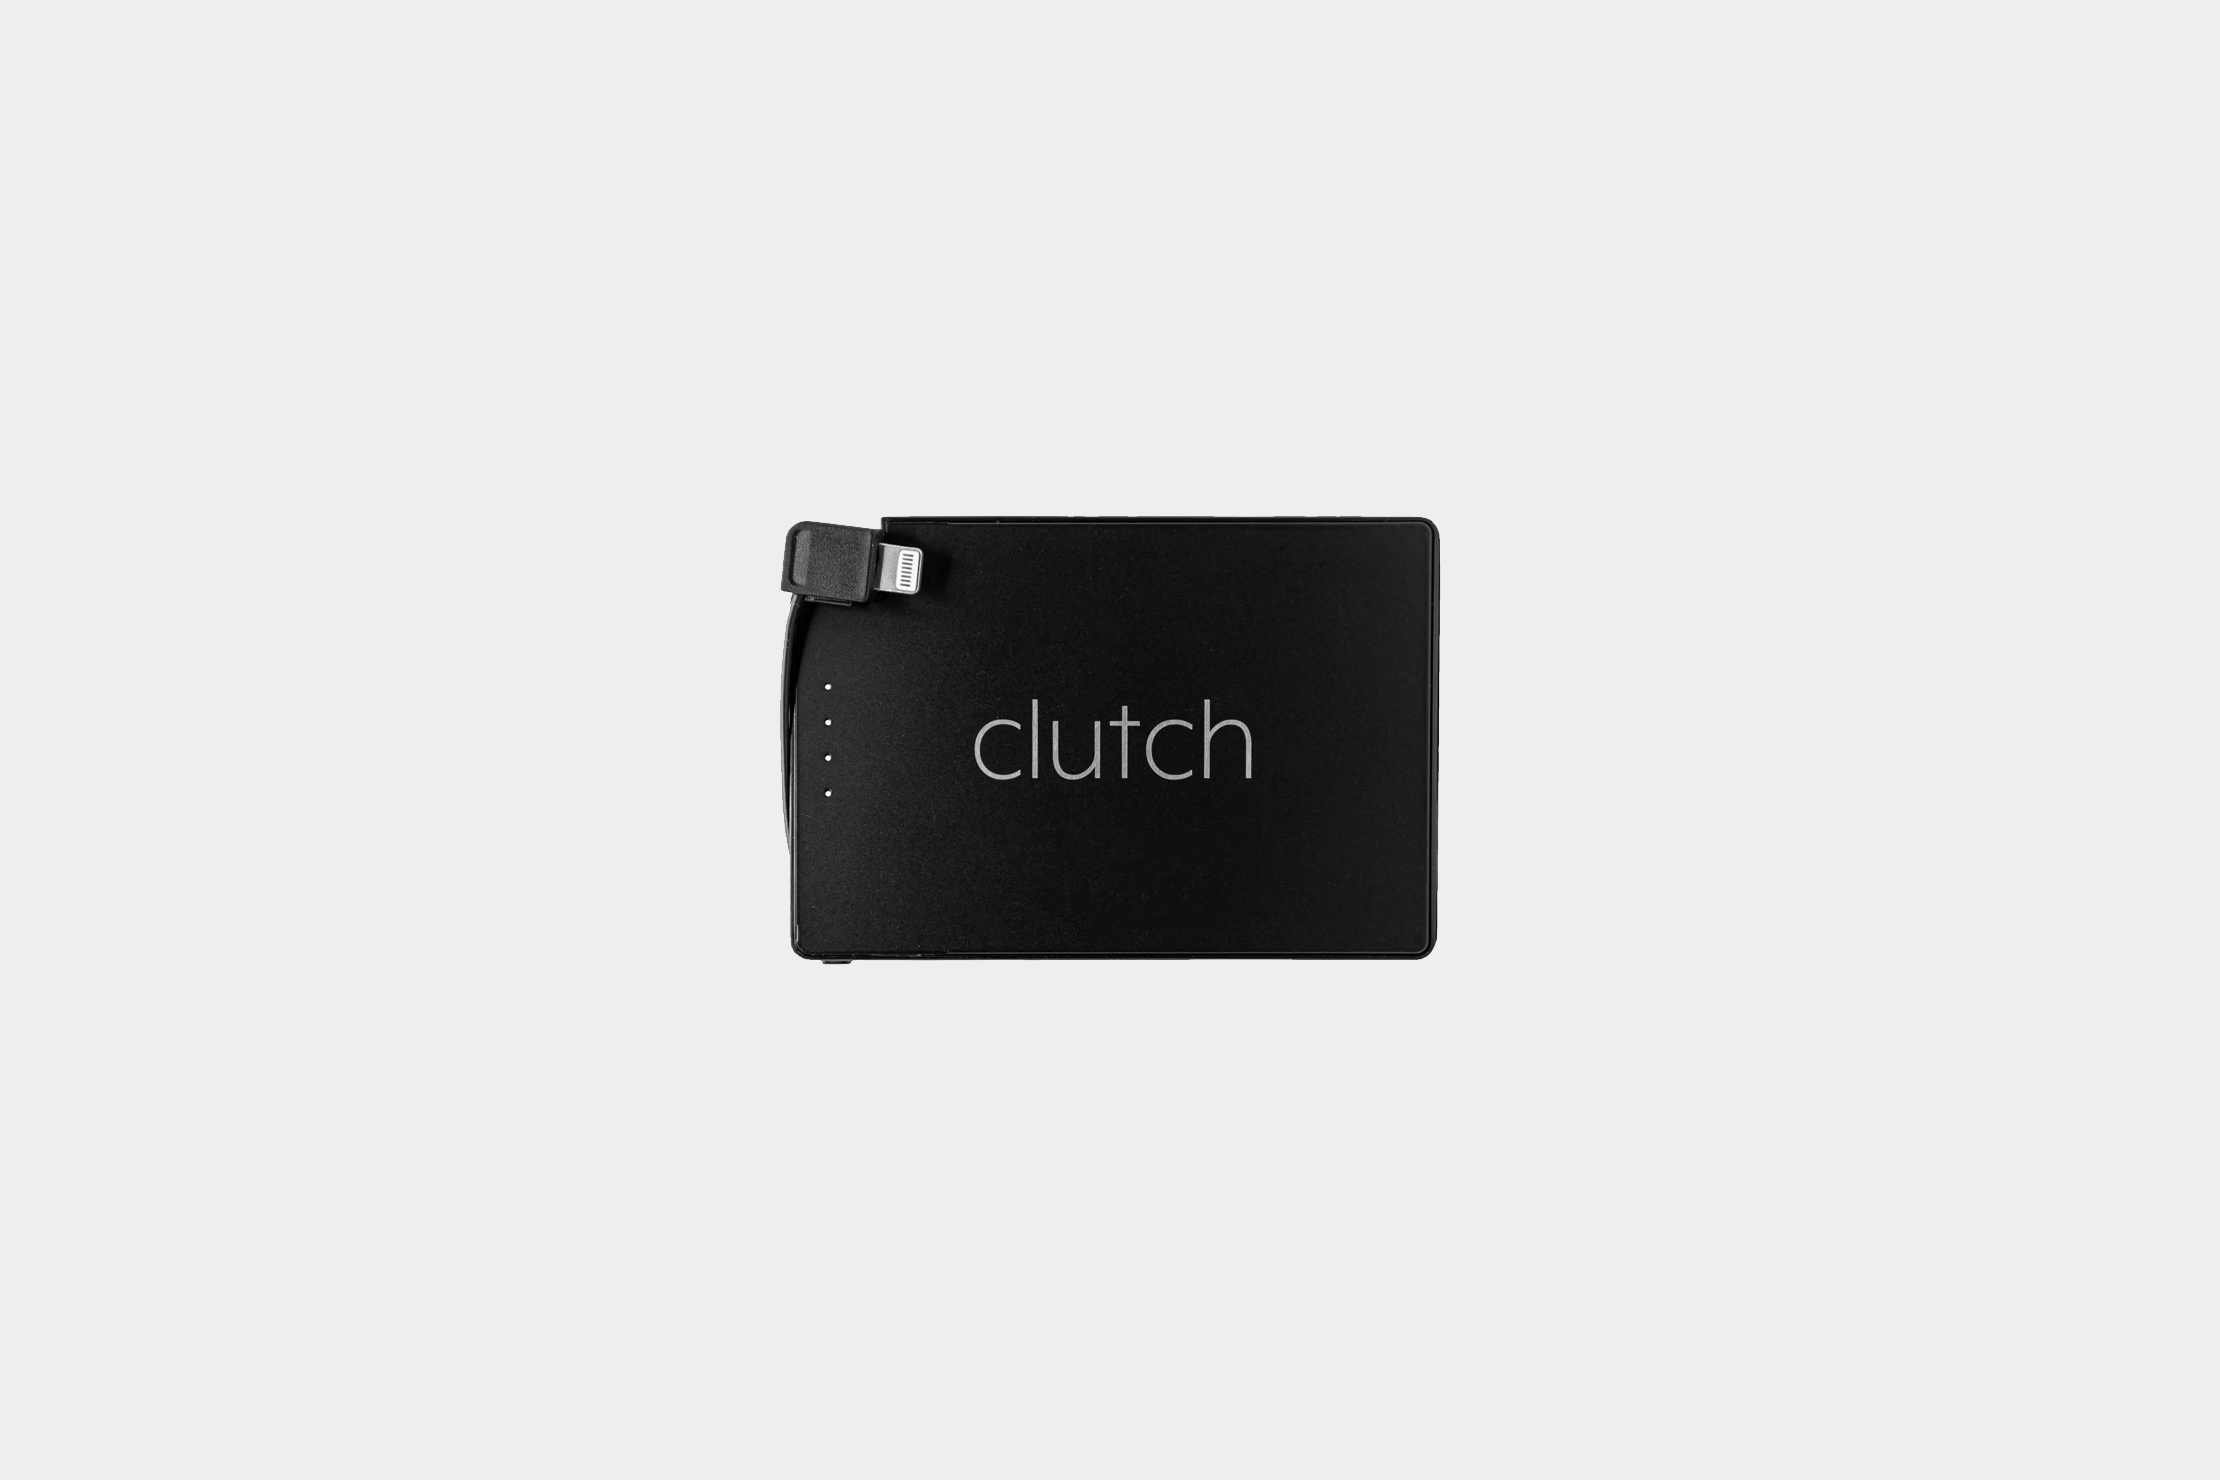 Clutch Charger Ultra Thin and Small Power Bank With Attached Cable High-Speed Portable Smartphone Charger Compatible with iPhone iPad and AirPods